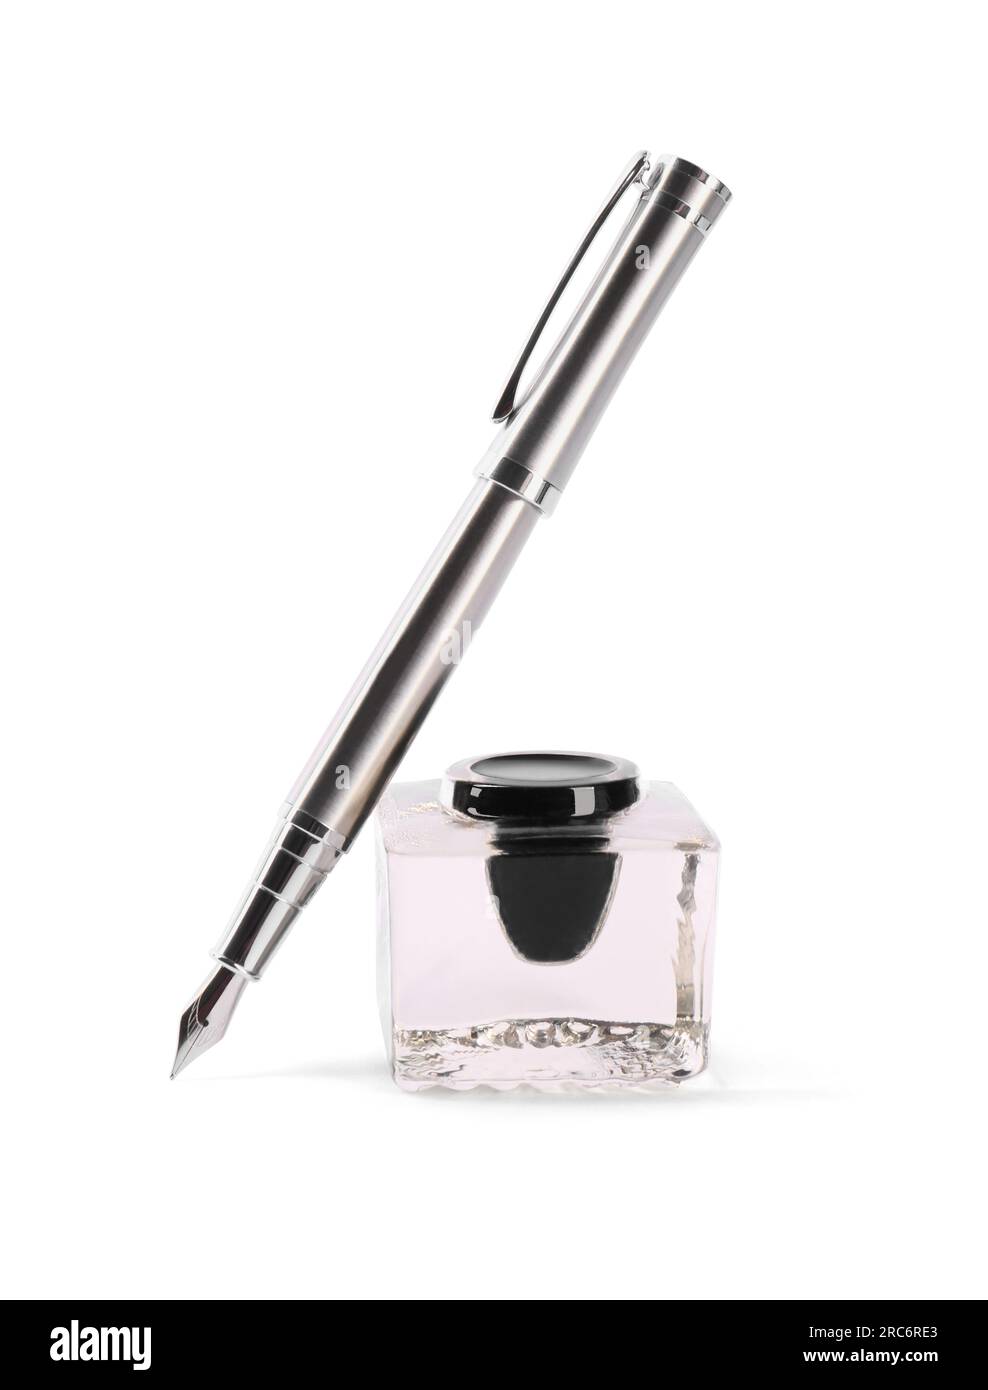 Old Dip Pen And Inkwell Isolated On White Background Stock Photo, Picture  and Royalty Free Image. Image 59394526.